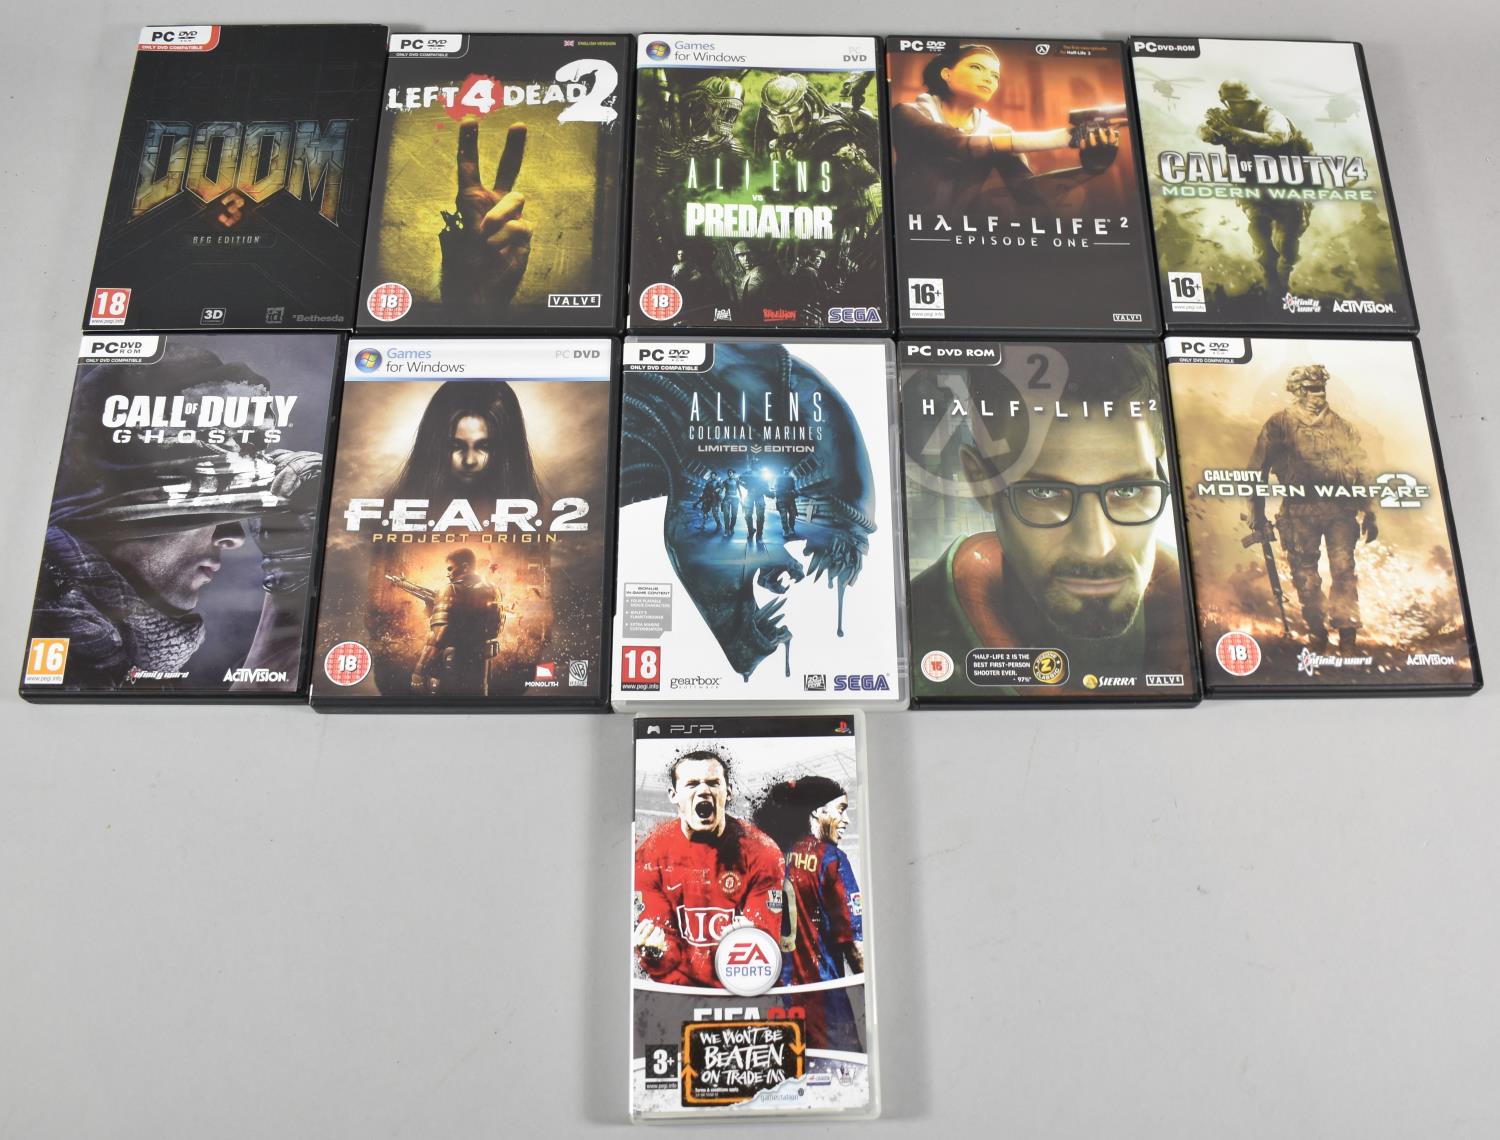 A Collection of Ten PC Games and One PSP Football Game